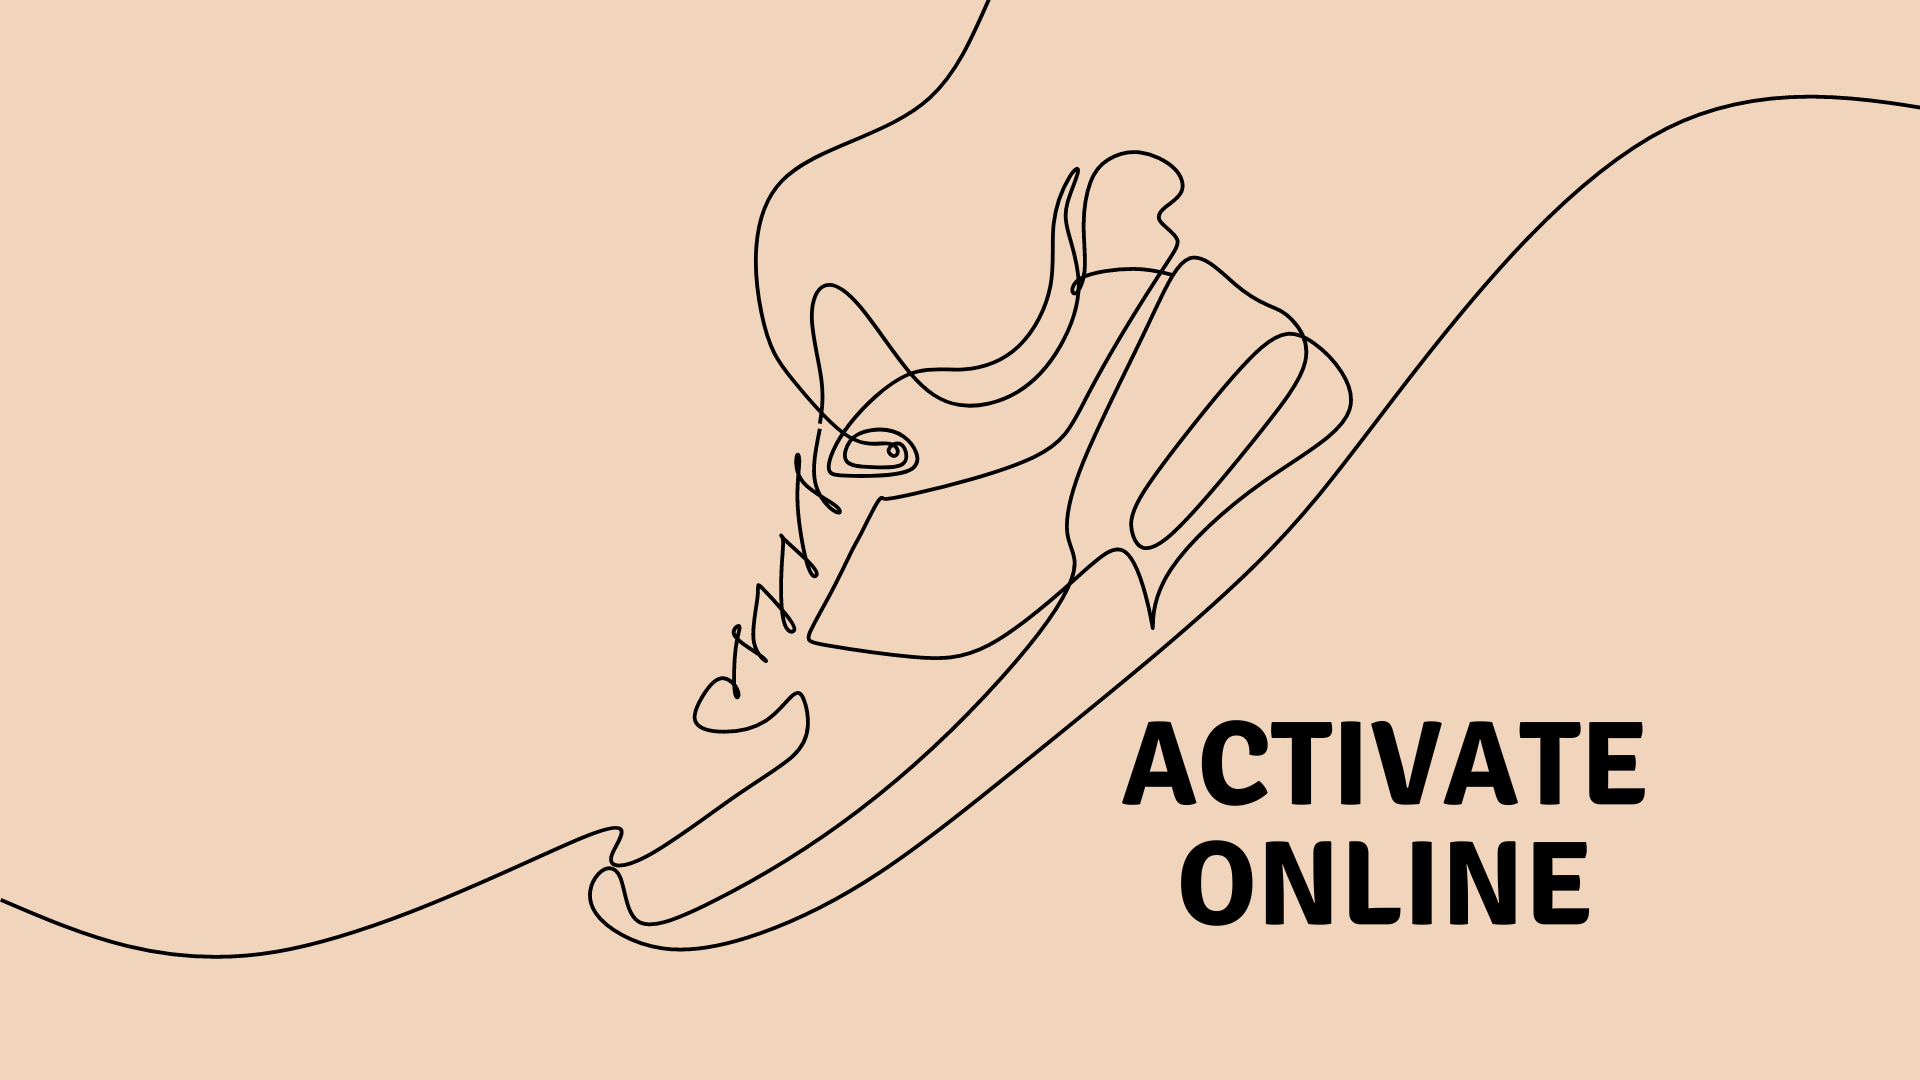 ACTIVATE ONLINE - Workout 4 Year 4-6: Animal Farm